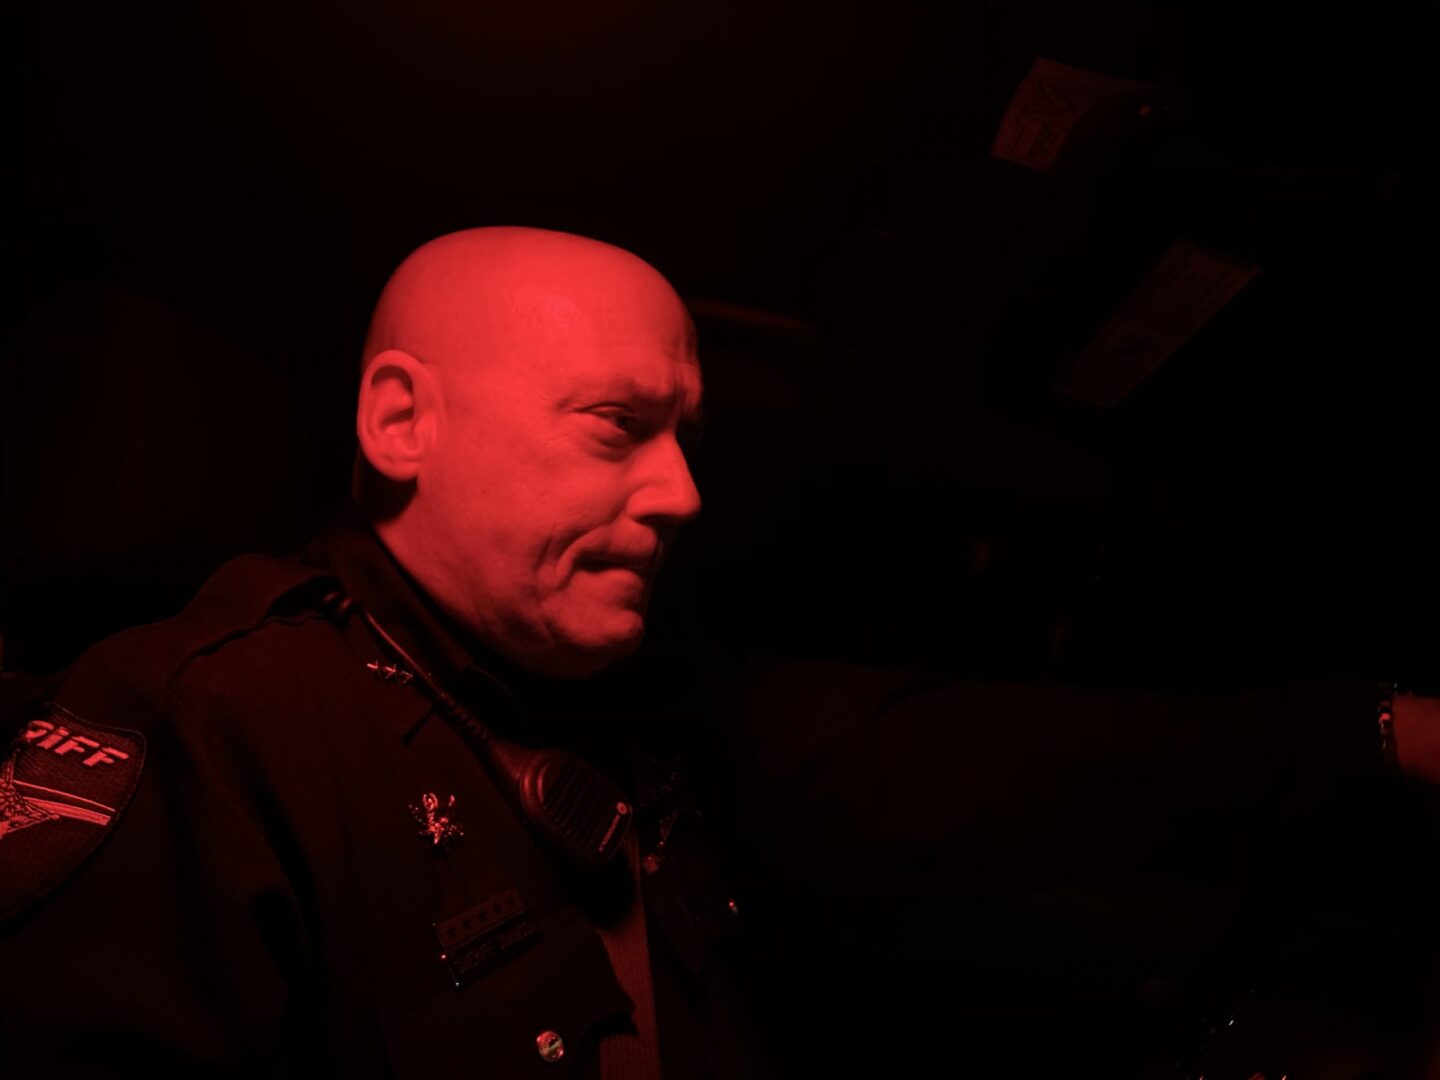 A bald police officer in a vehicle, illuminated by red light, looks to the side with a serious expression.